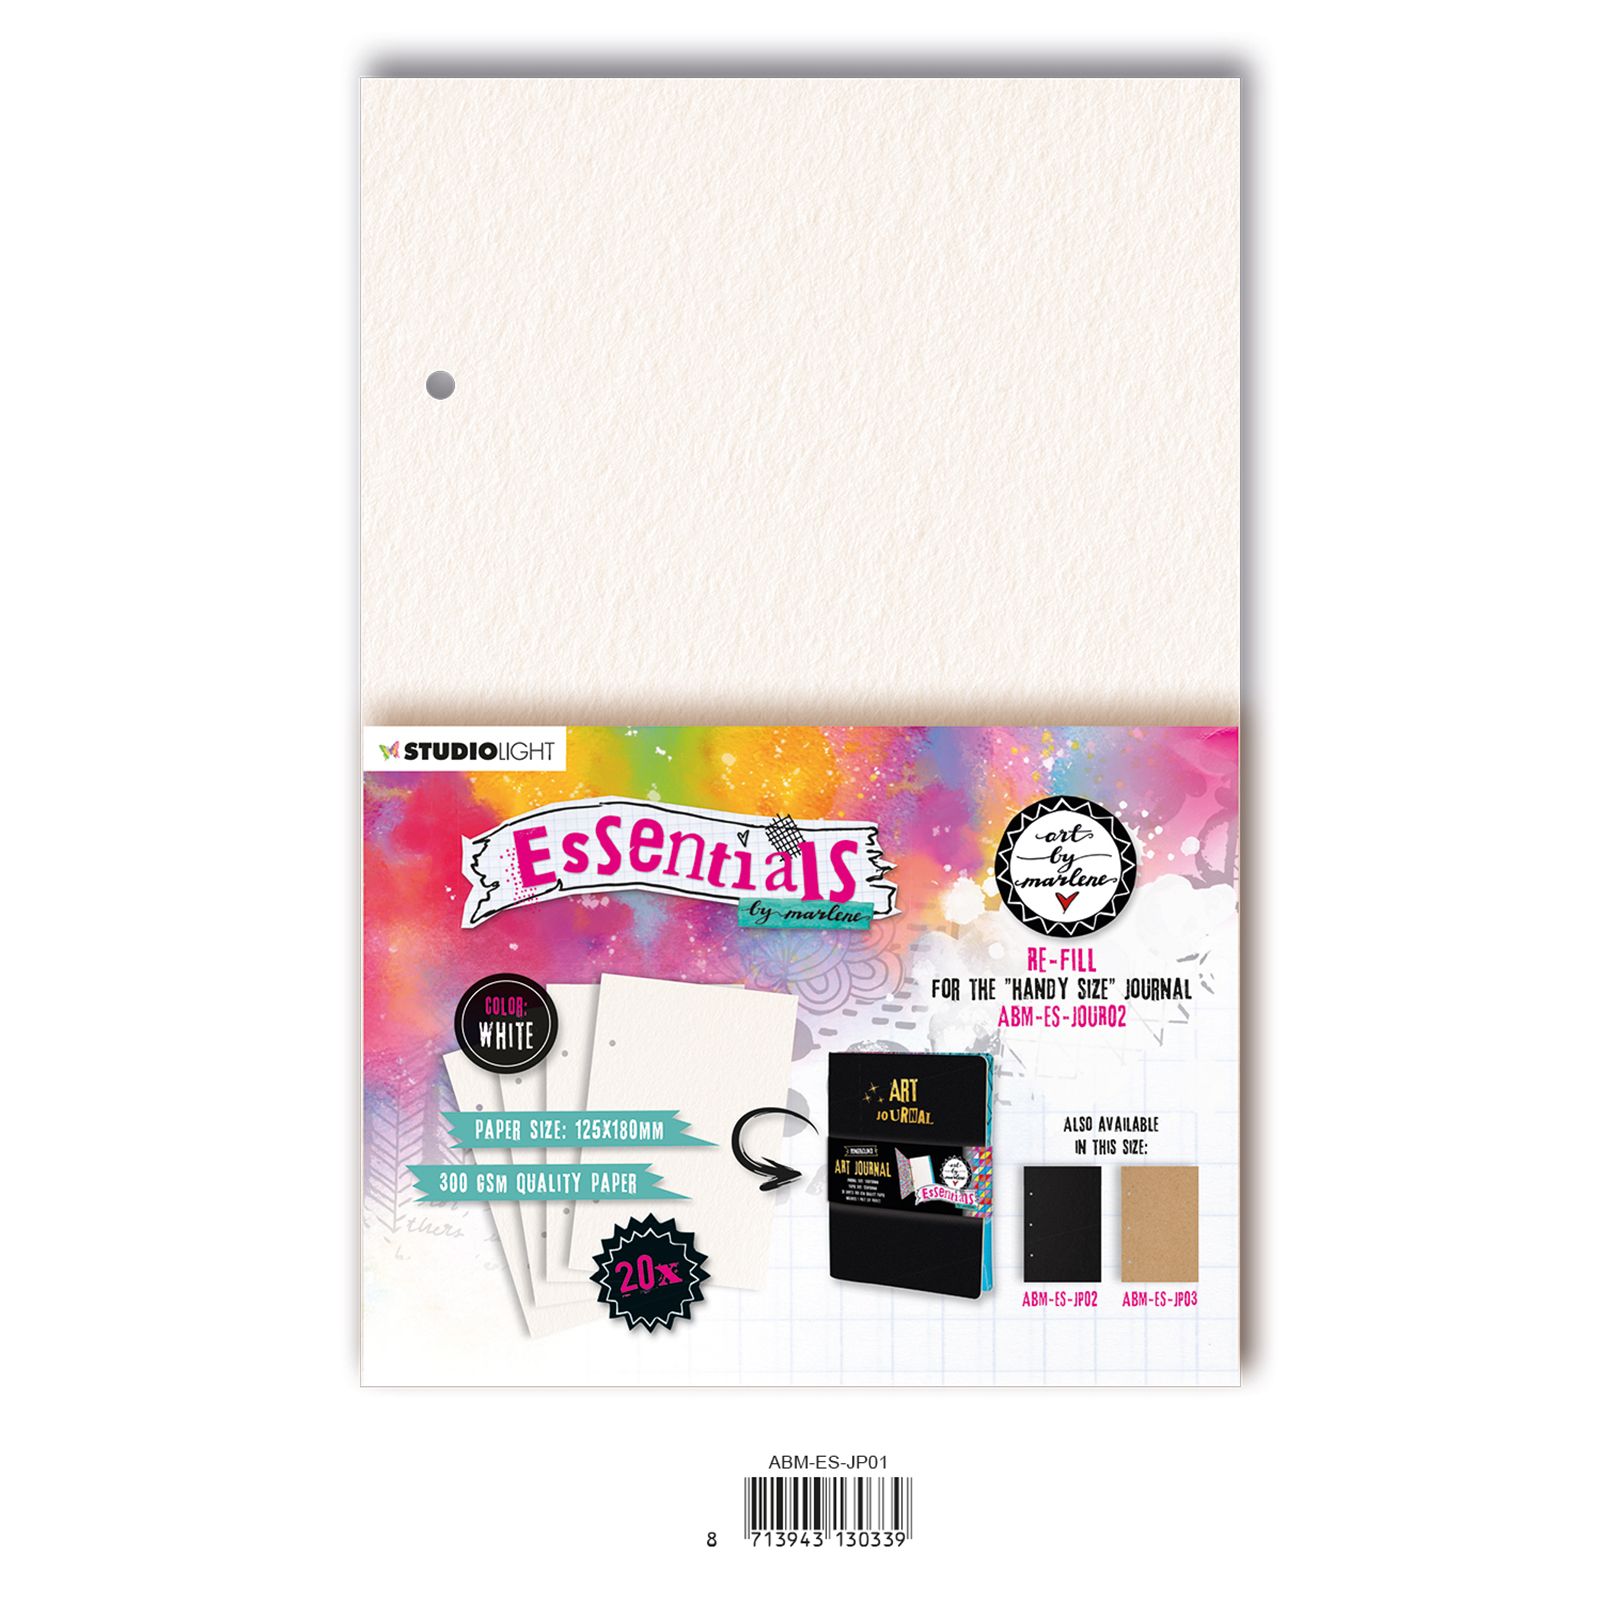 Studio Light • Essentials re-fill for The handy size journal White